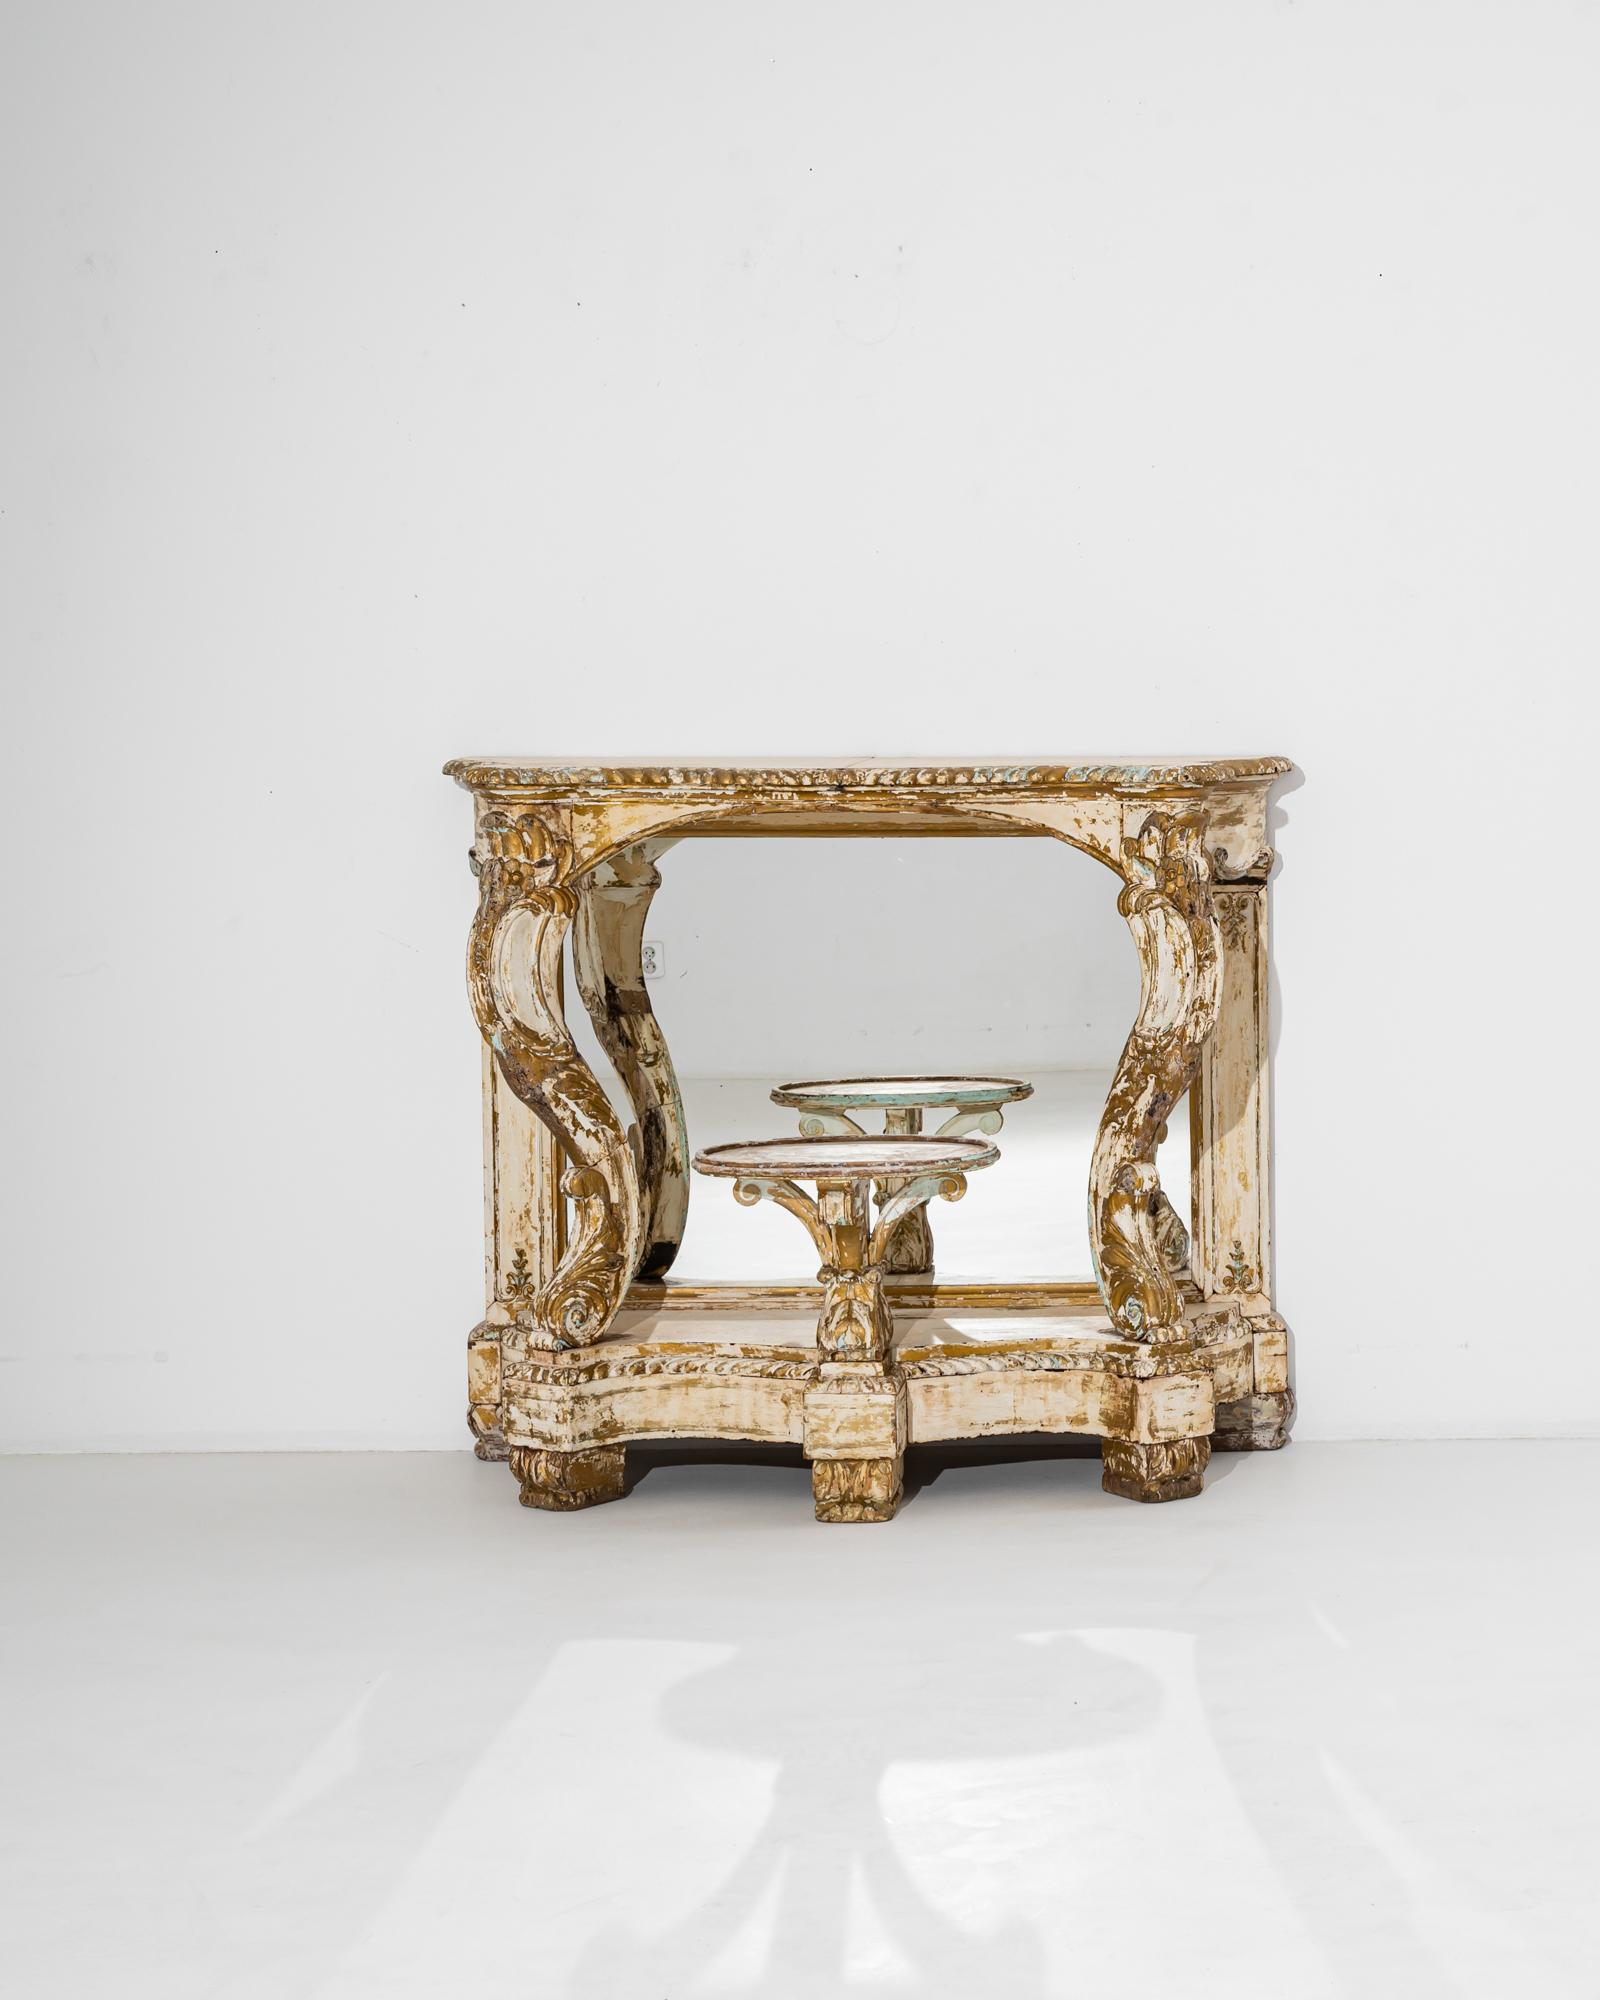 Elegant and mercurial, this antique wooden console table is a quintessential Rococo fantasy. Built in Italy in the 1800s, the form evokes grottos and fountains, a forest shrine overgrown by lush plants. The dramatic S-shaped curves of the front legs